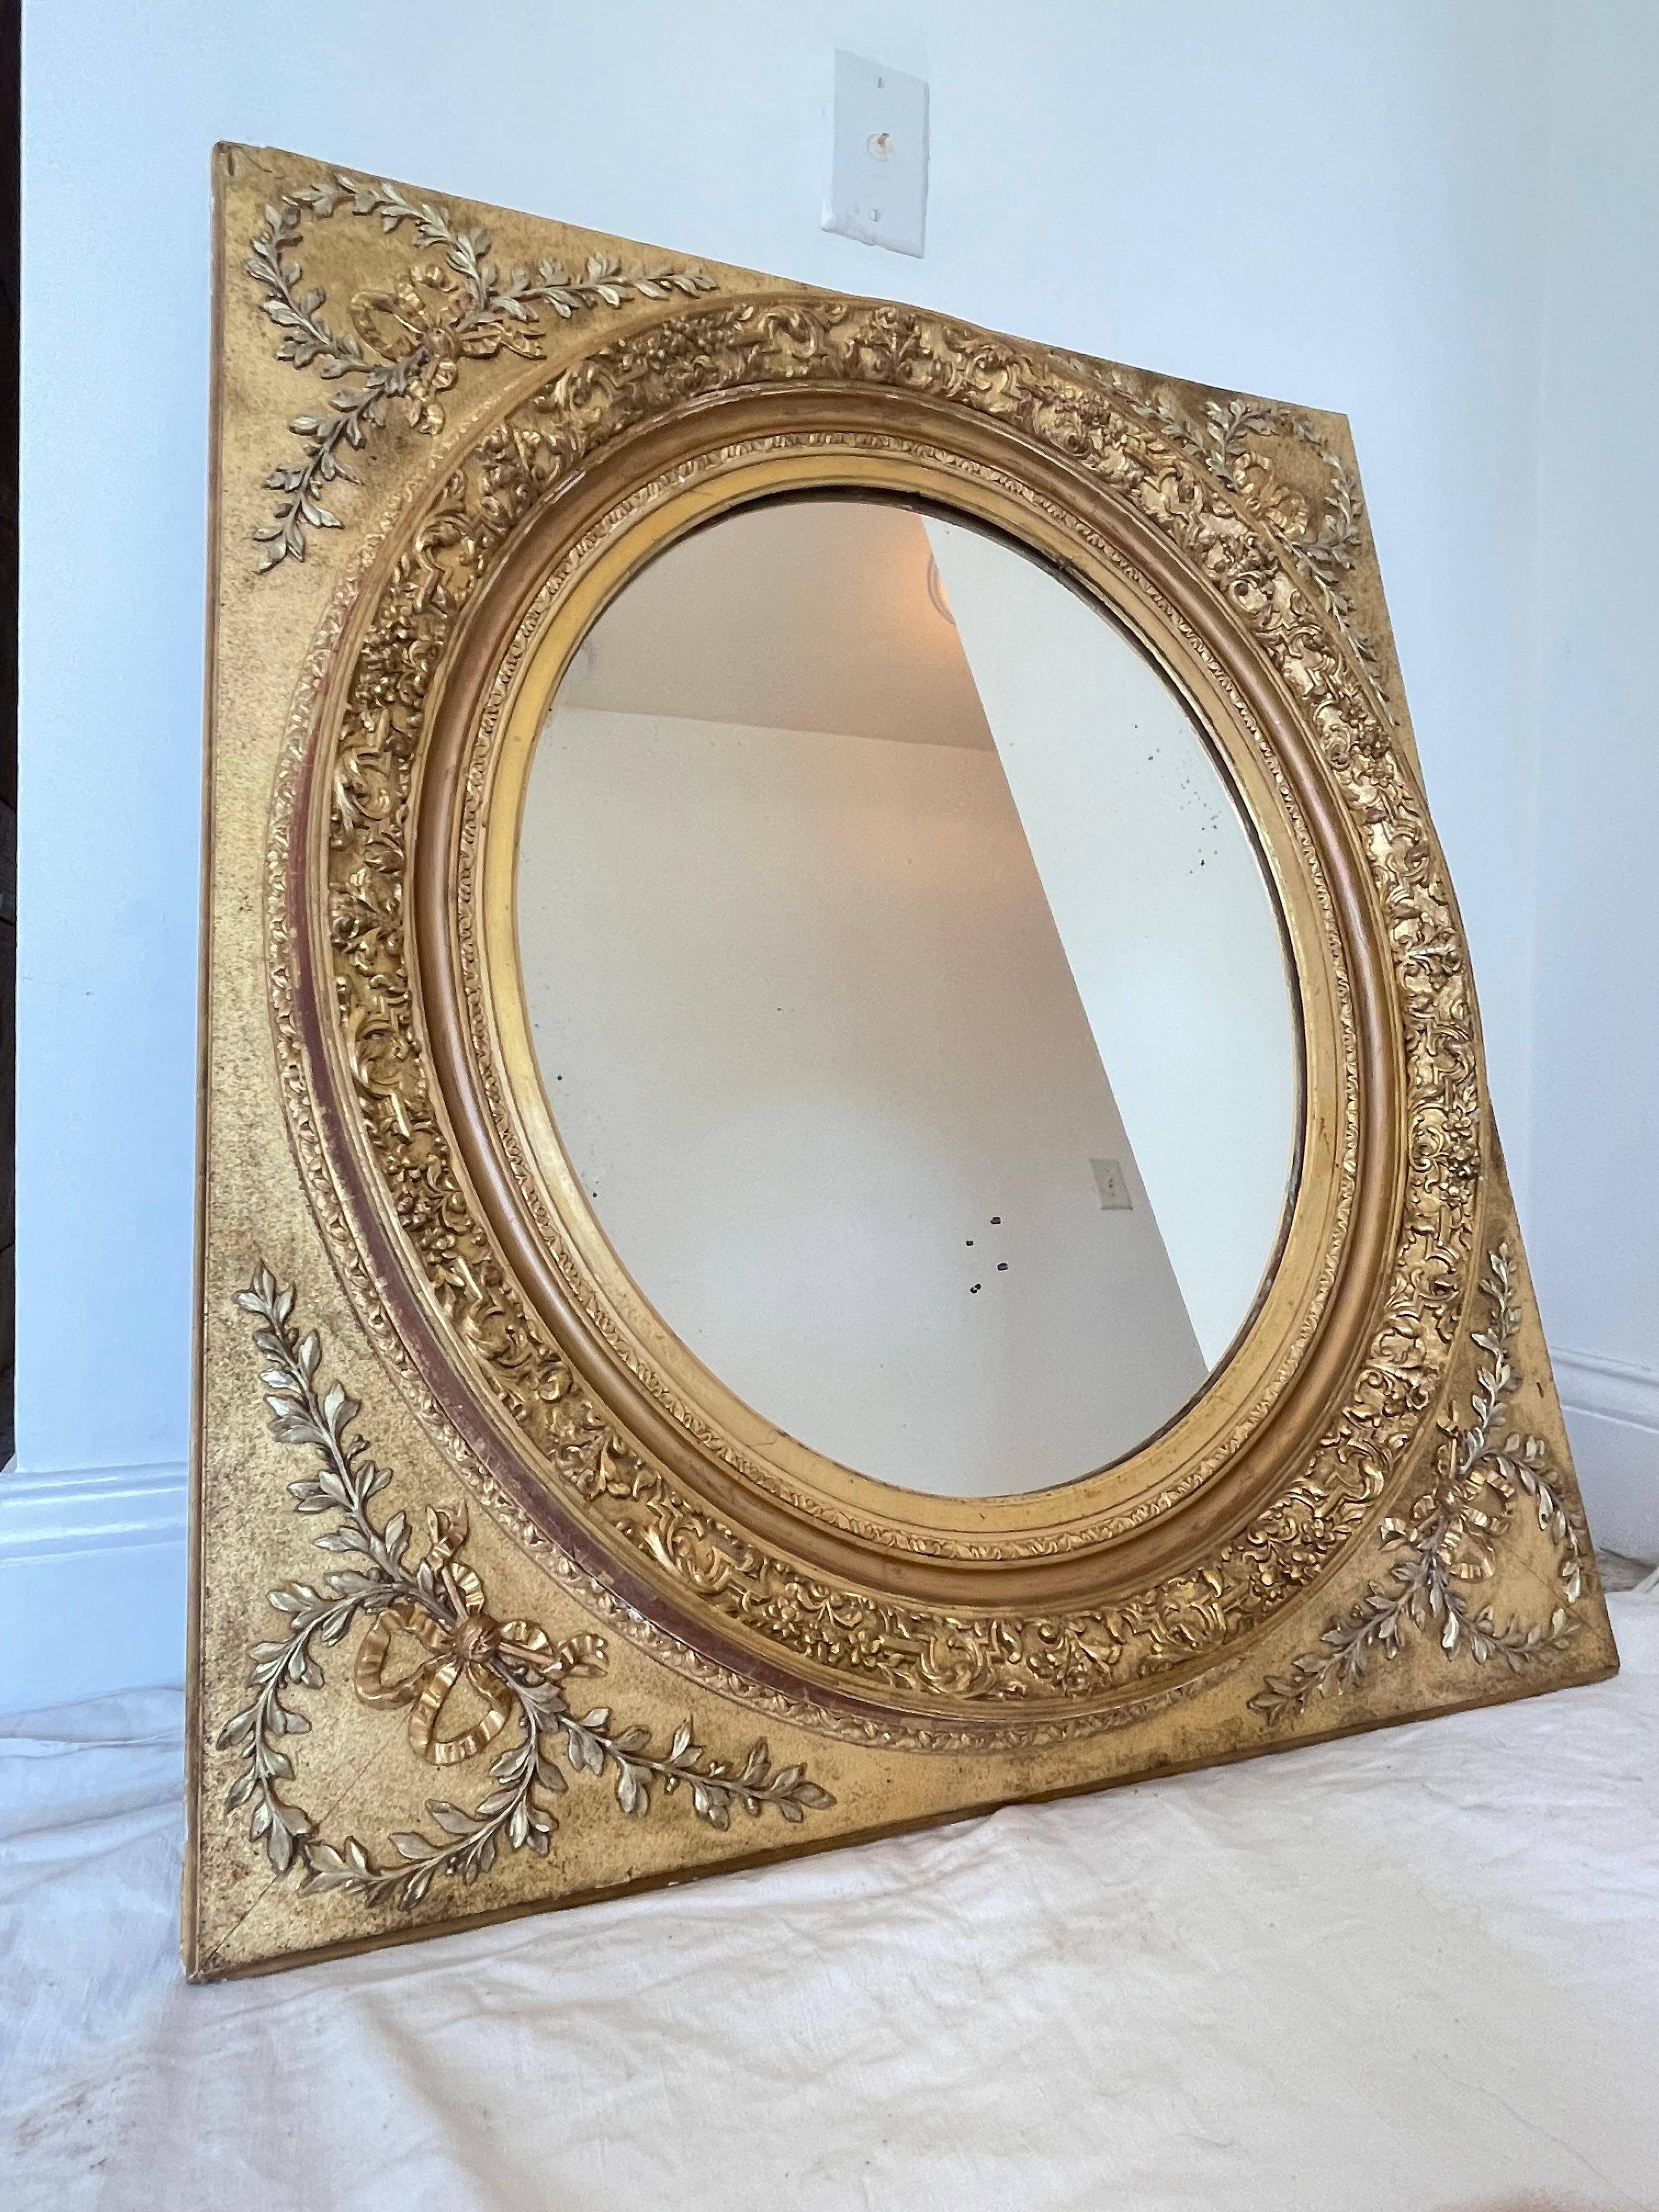 Pretty mirror in gilded wood of Napoleon 3 era. Mirror in the shape of a medallion has foliage and ribbon on the corners. Around the oval mercury mirror, friezes richly garnished with garlands of flowers.